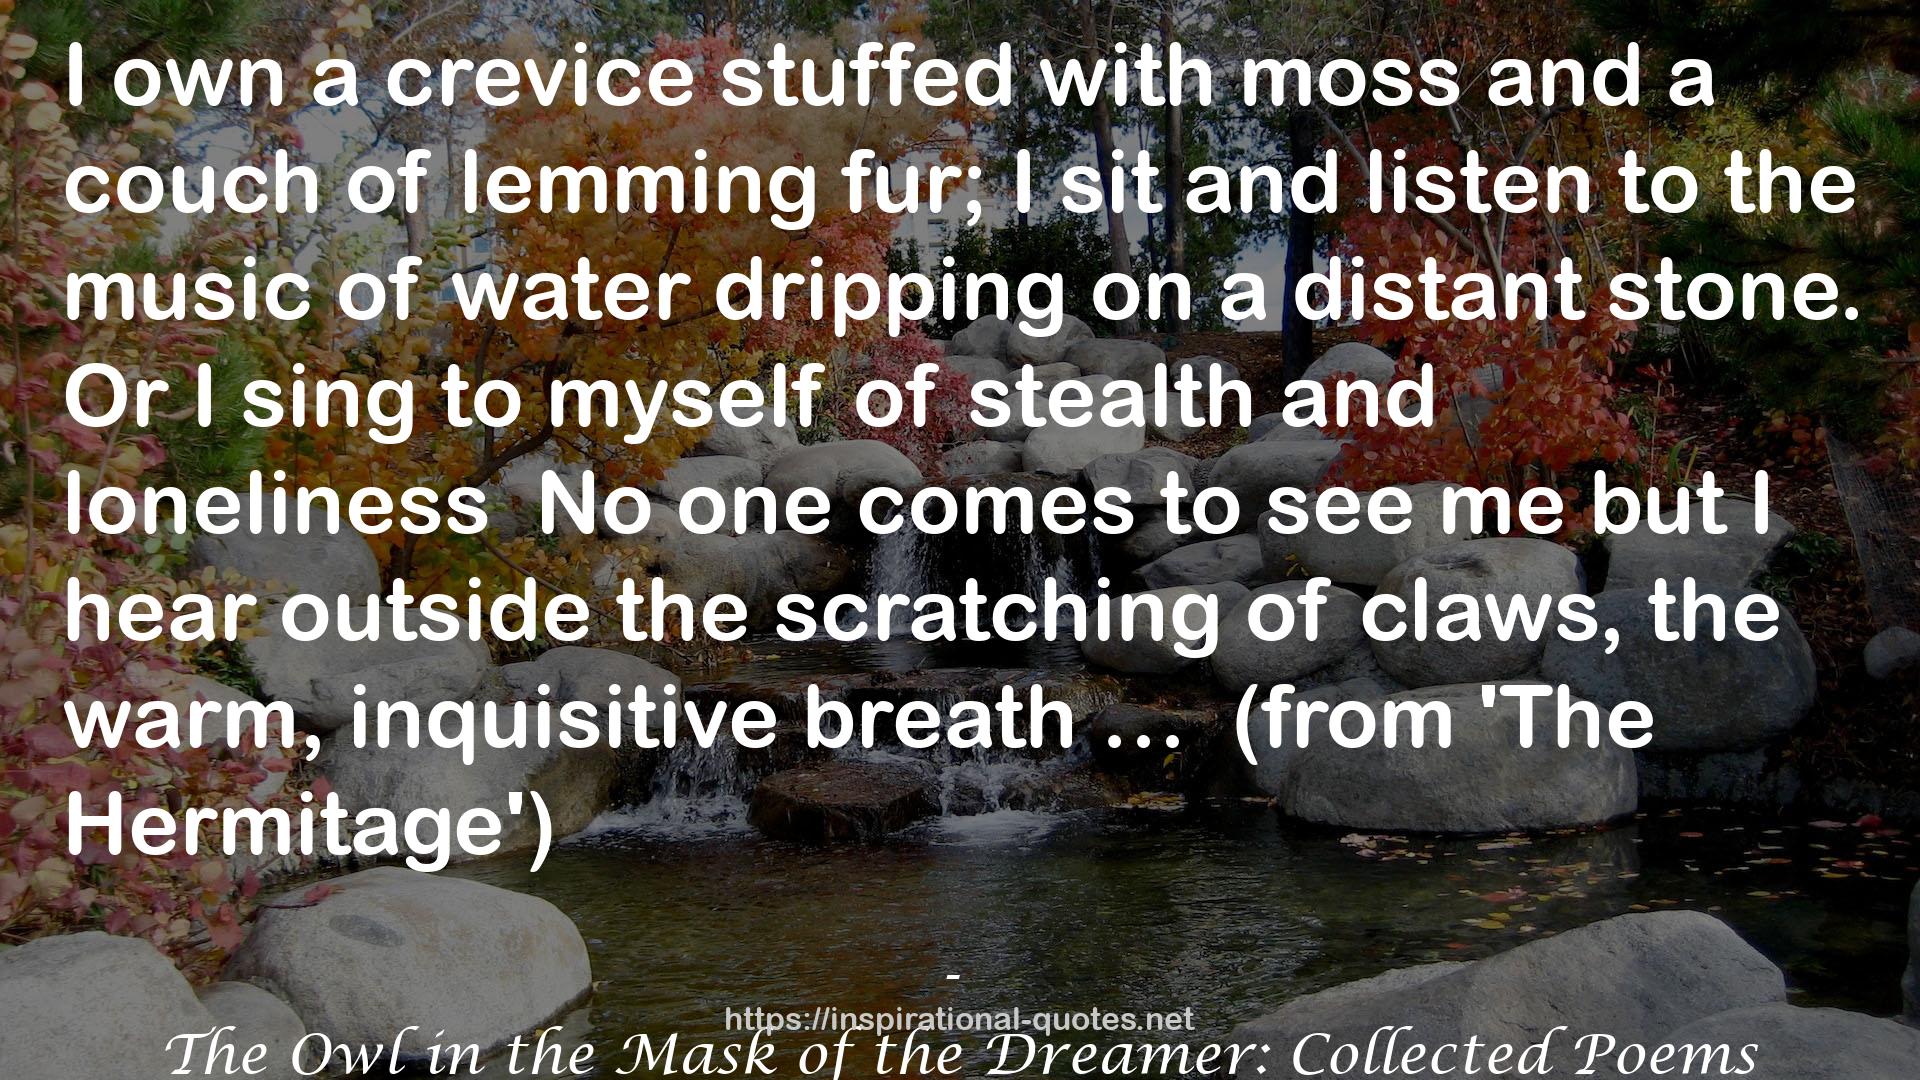 The Owl in the Mask of the Dreamer: Collected Poems QUOTES